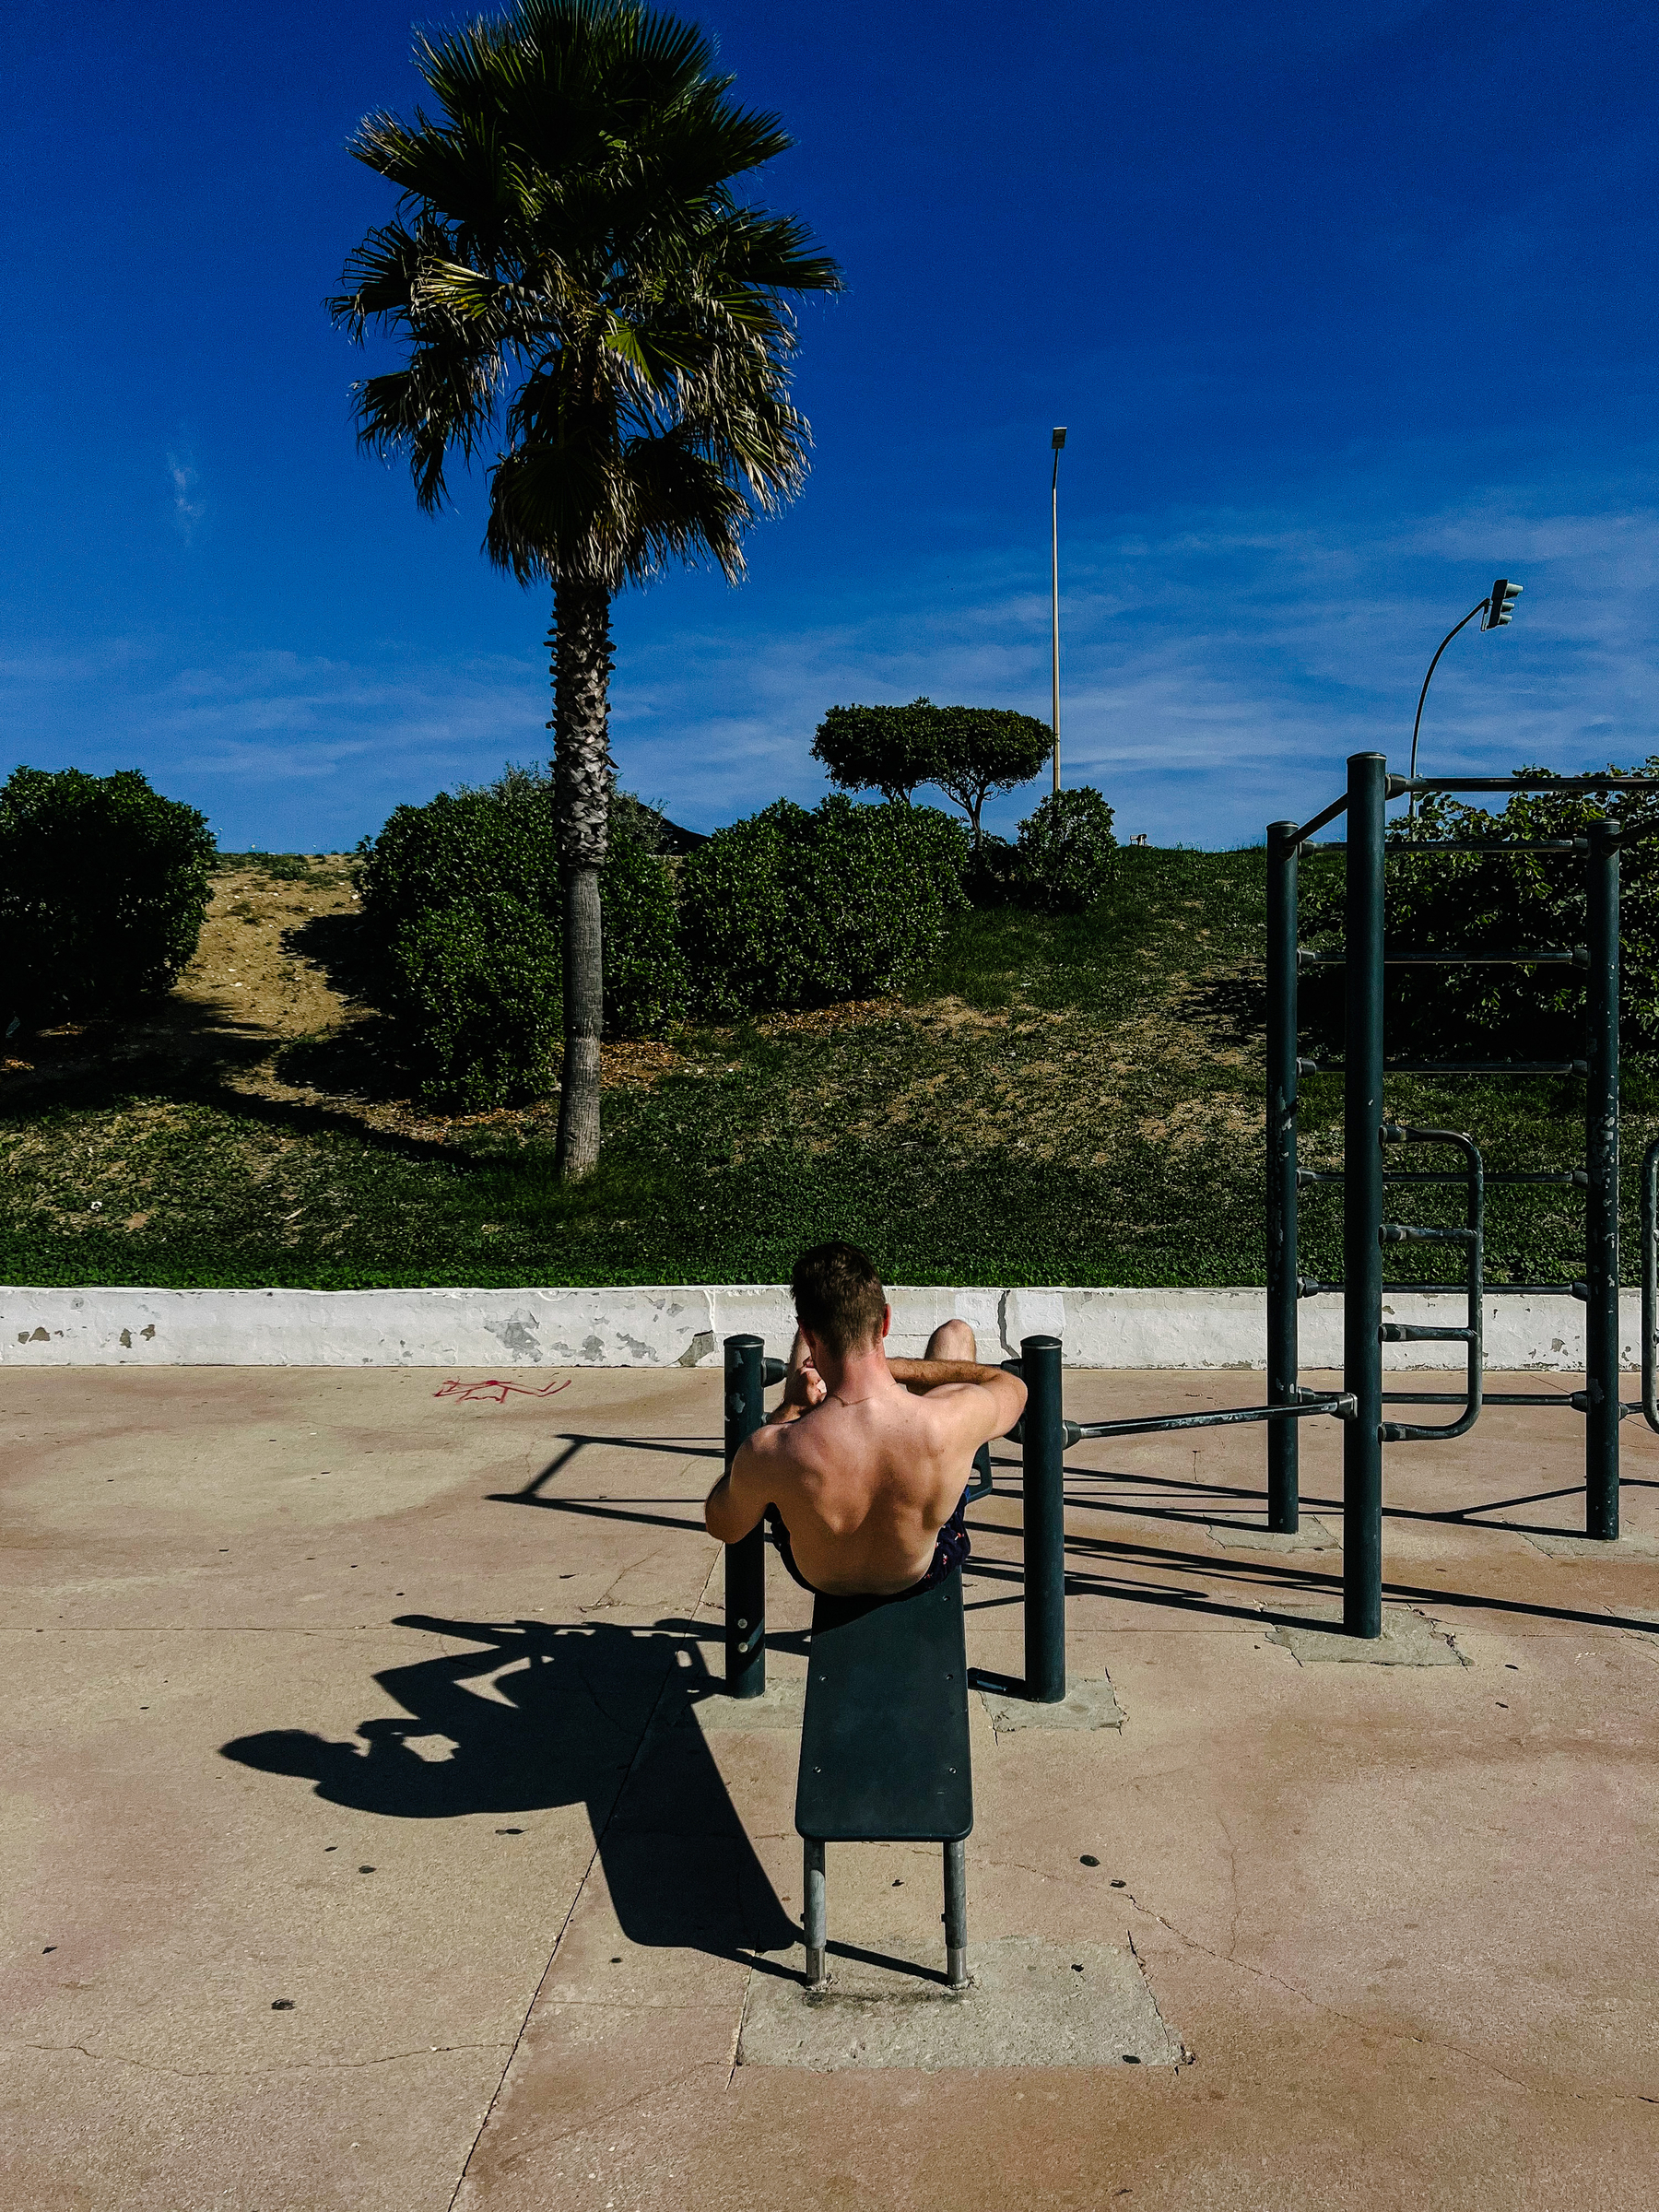 A man exercises at the beach